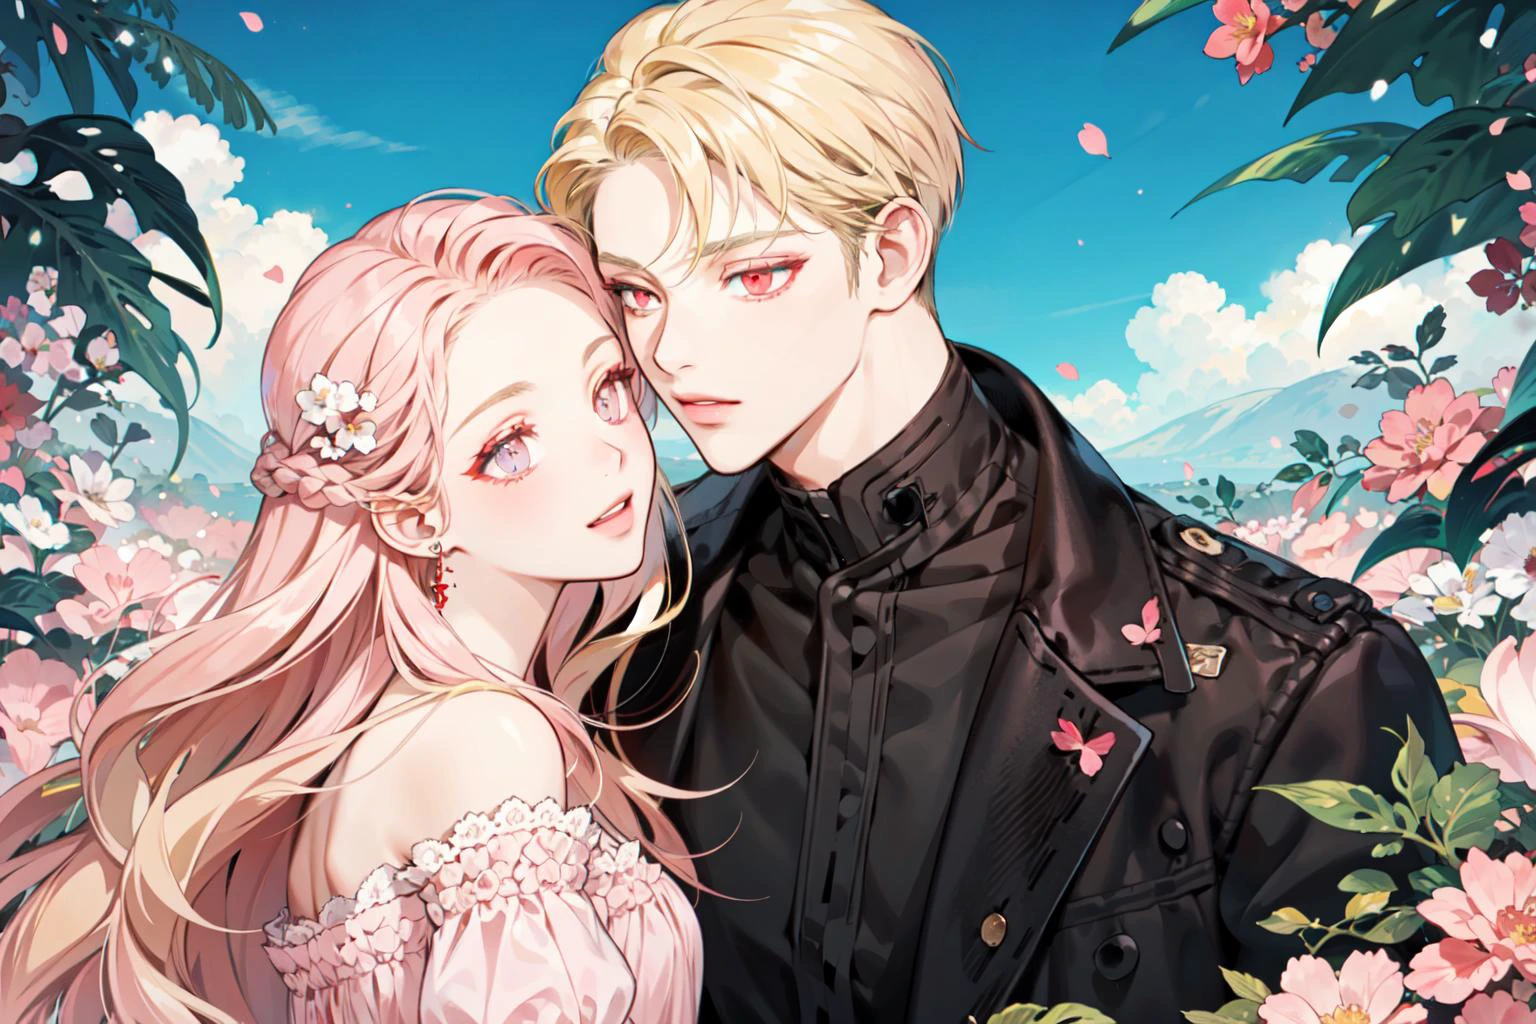 masterpiece, best quality, 2others, couple, hetero, 1man with 1woman,
man hair blonde, (Man_red_eyes:1.4), 
woman hair blonde, (woman_pink_eyes:1.4),
height difference, 
different colors, happy, love, flower-filled landscape, forehead